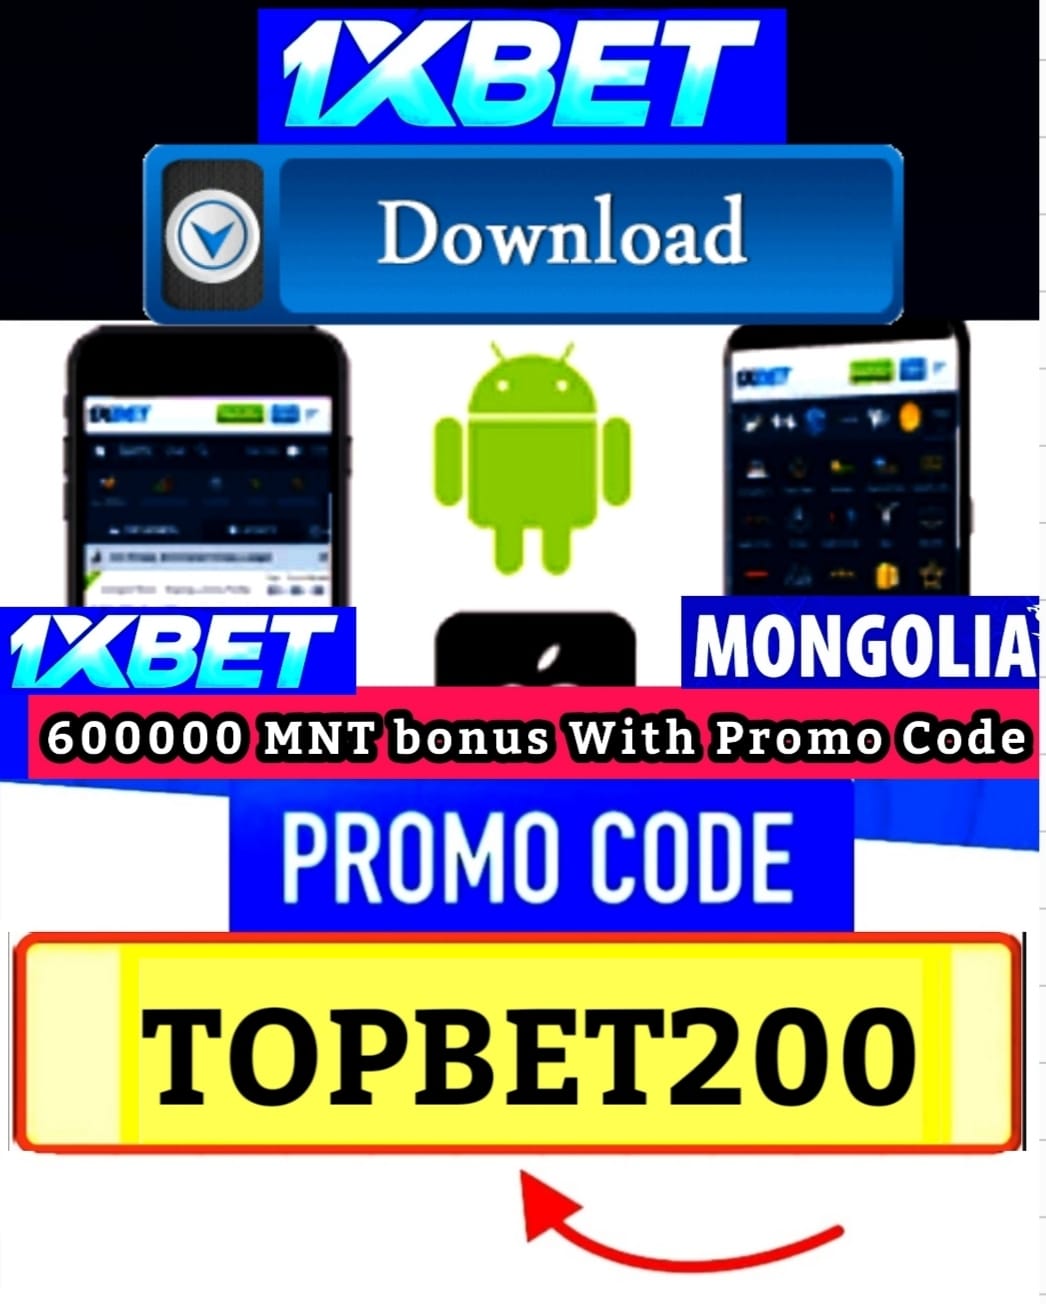 Get Rid of 1xBet Thailand Once and For All